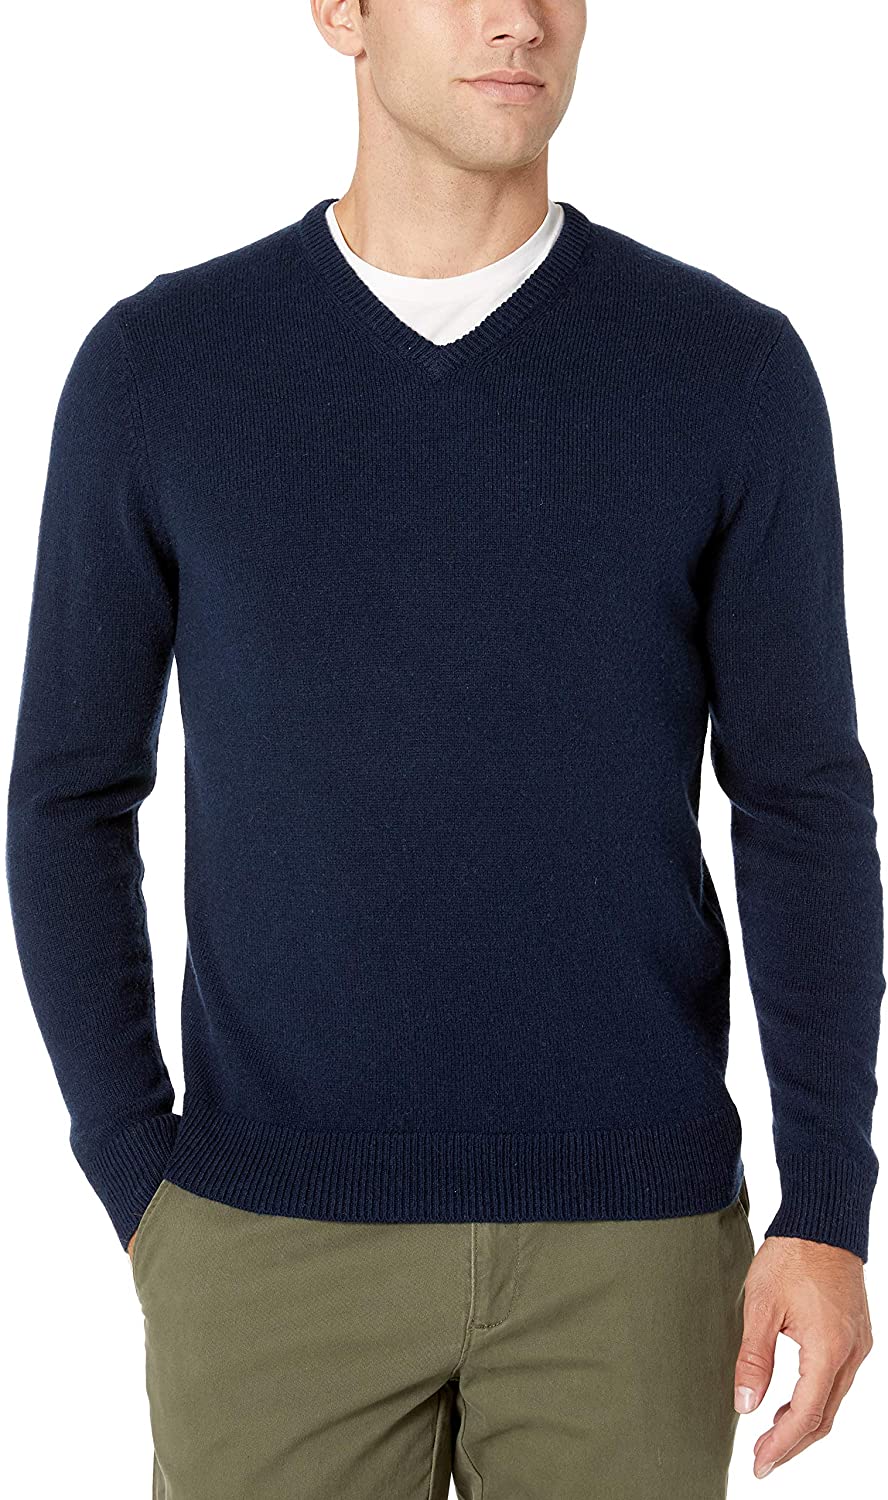 Essentials Men's Midweight V-Neck Cotton Sweater, Navy, Size X-Small ...